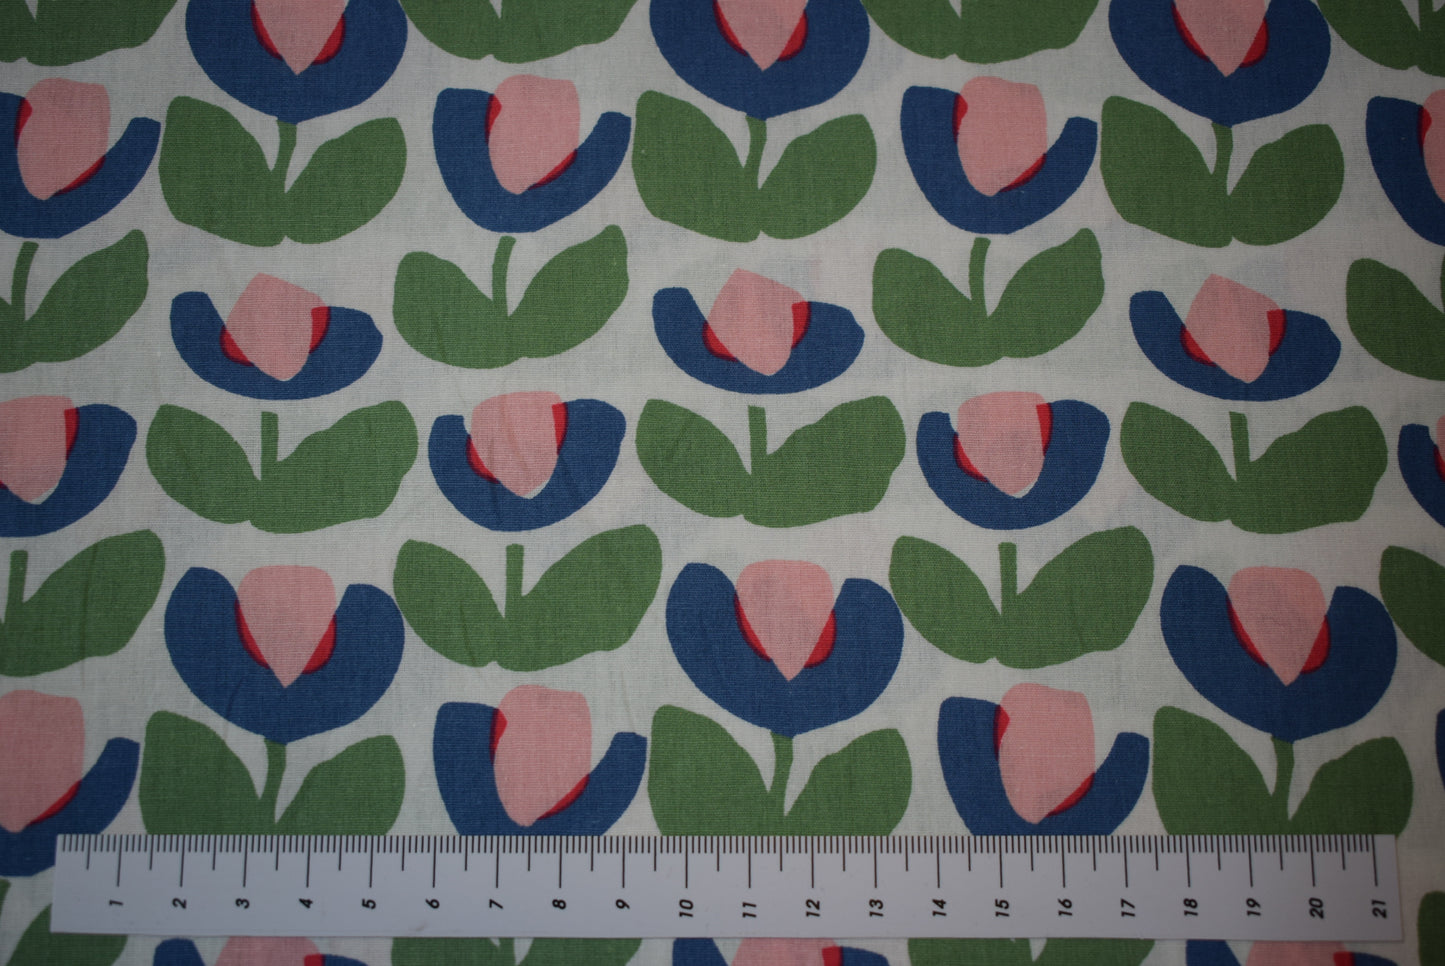 'Tulips of Amsterdam' printed lawn